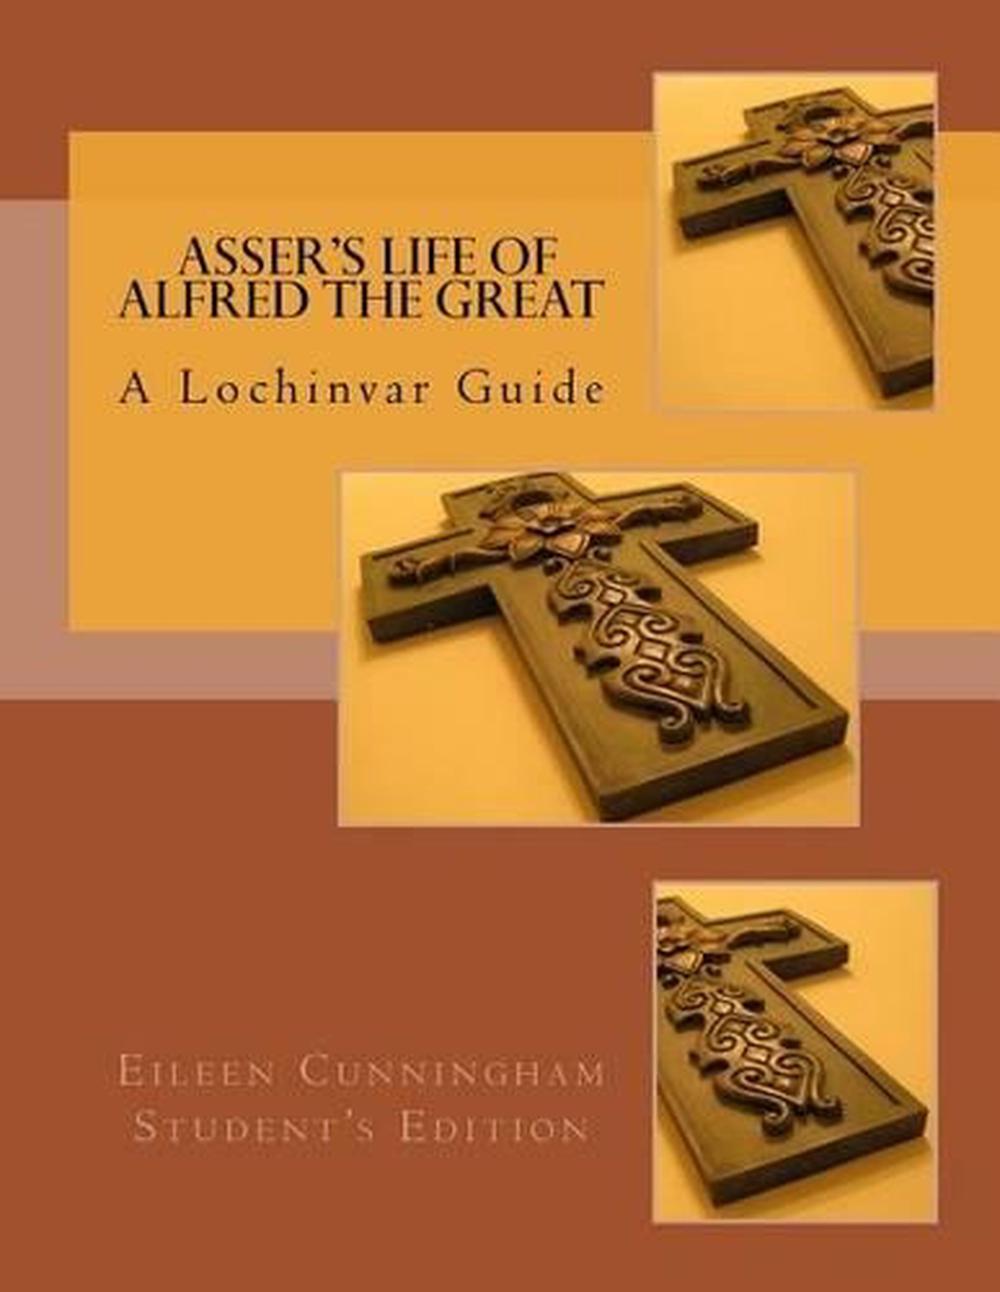 Alfred the Great by Asser